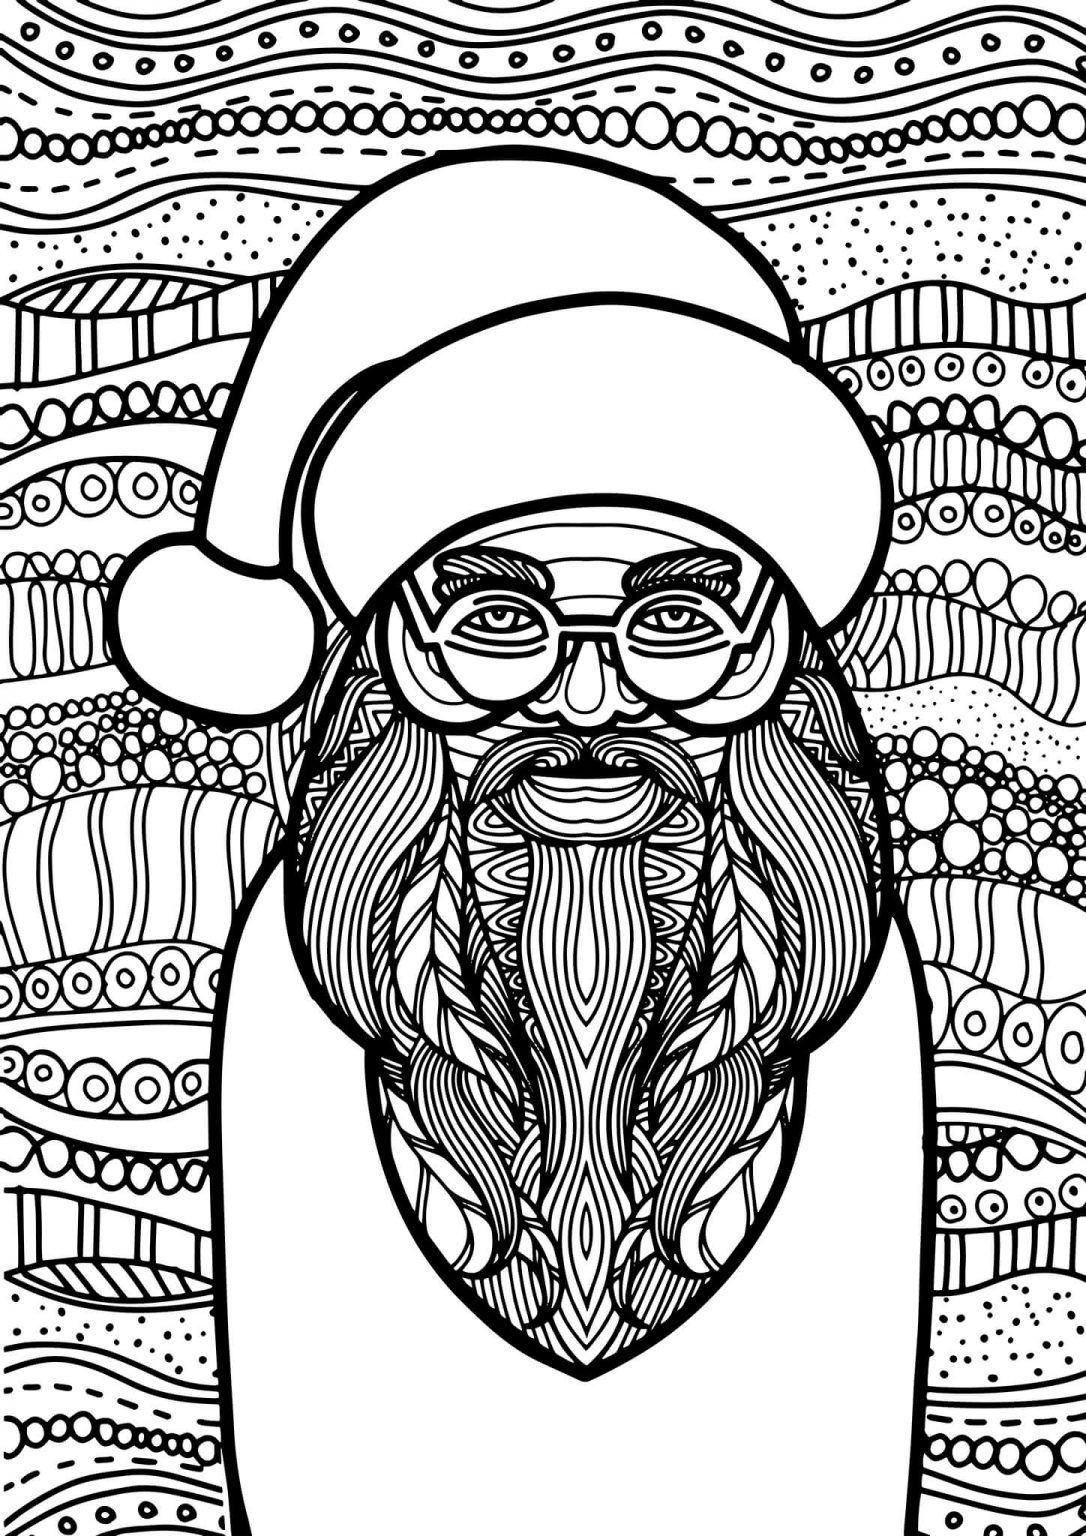 free-easy-to-print-adult-christmas-coloring-pages-tulamama